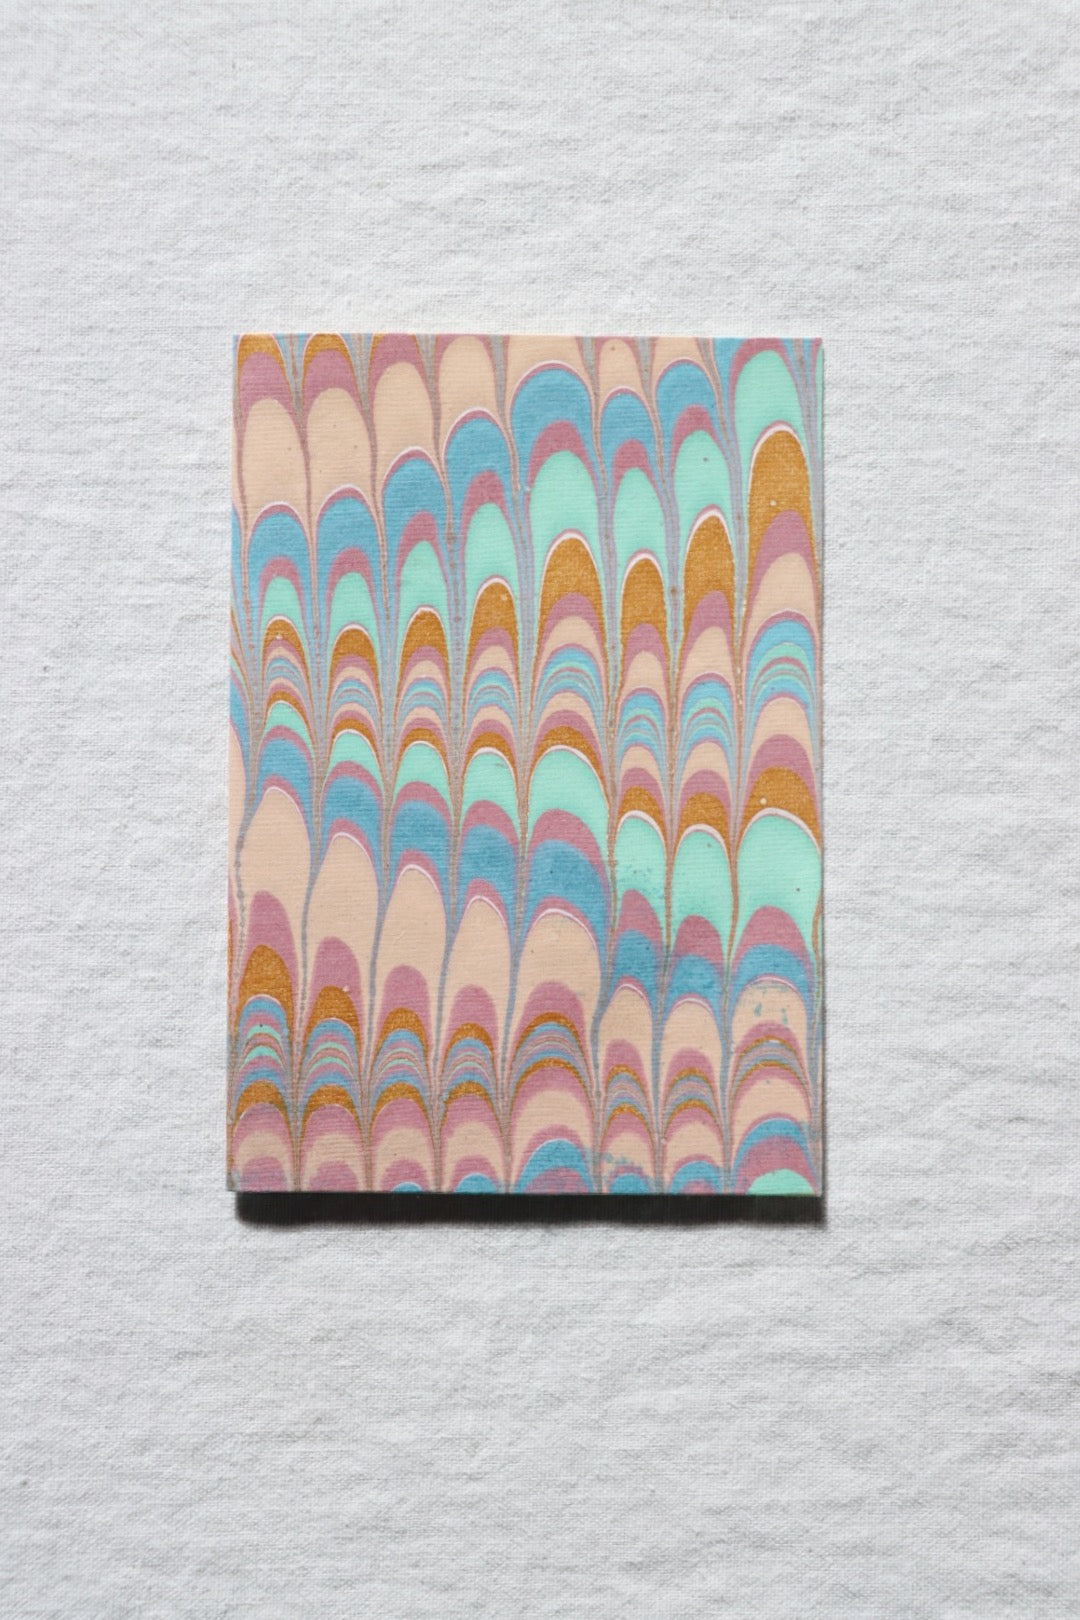 Mint Rose Scallop Marbled Greeting Card